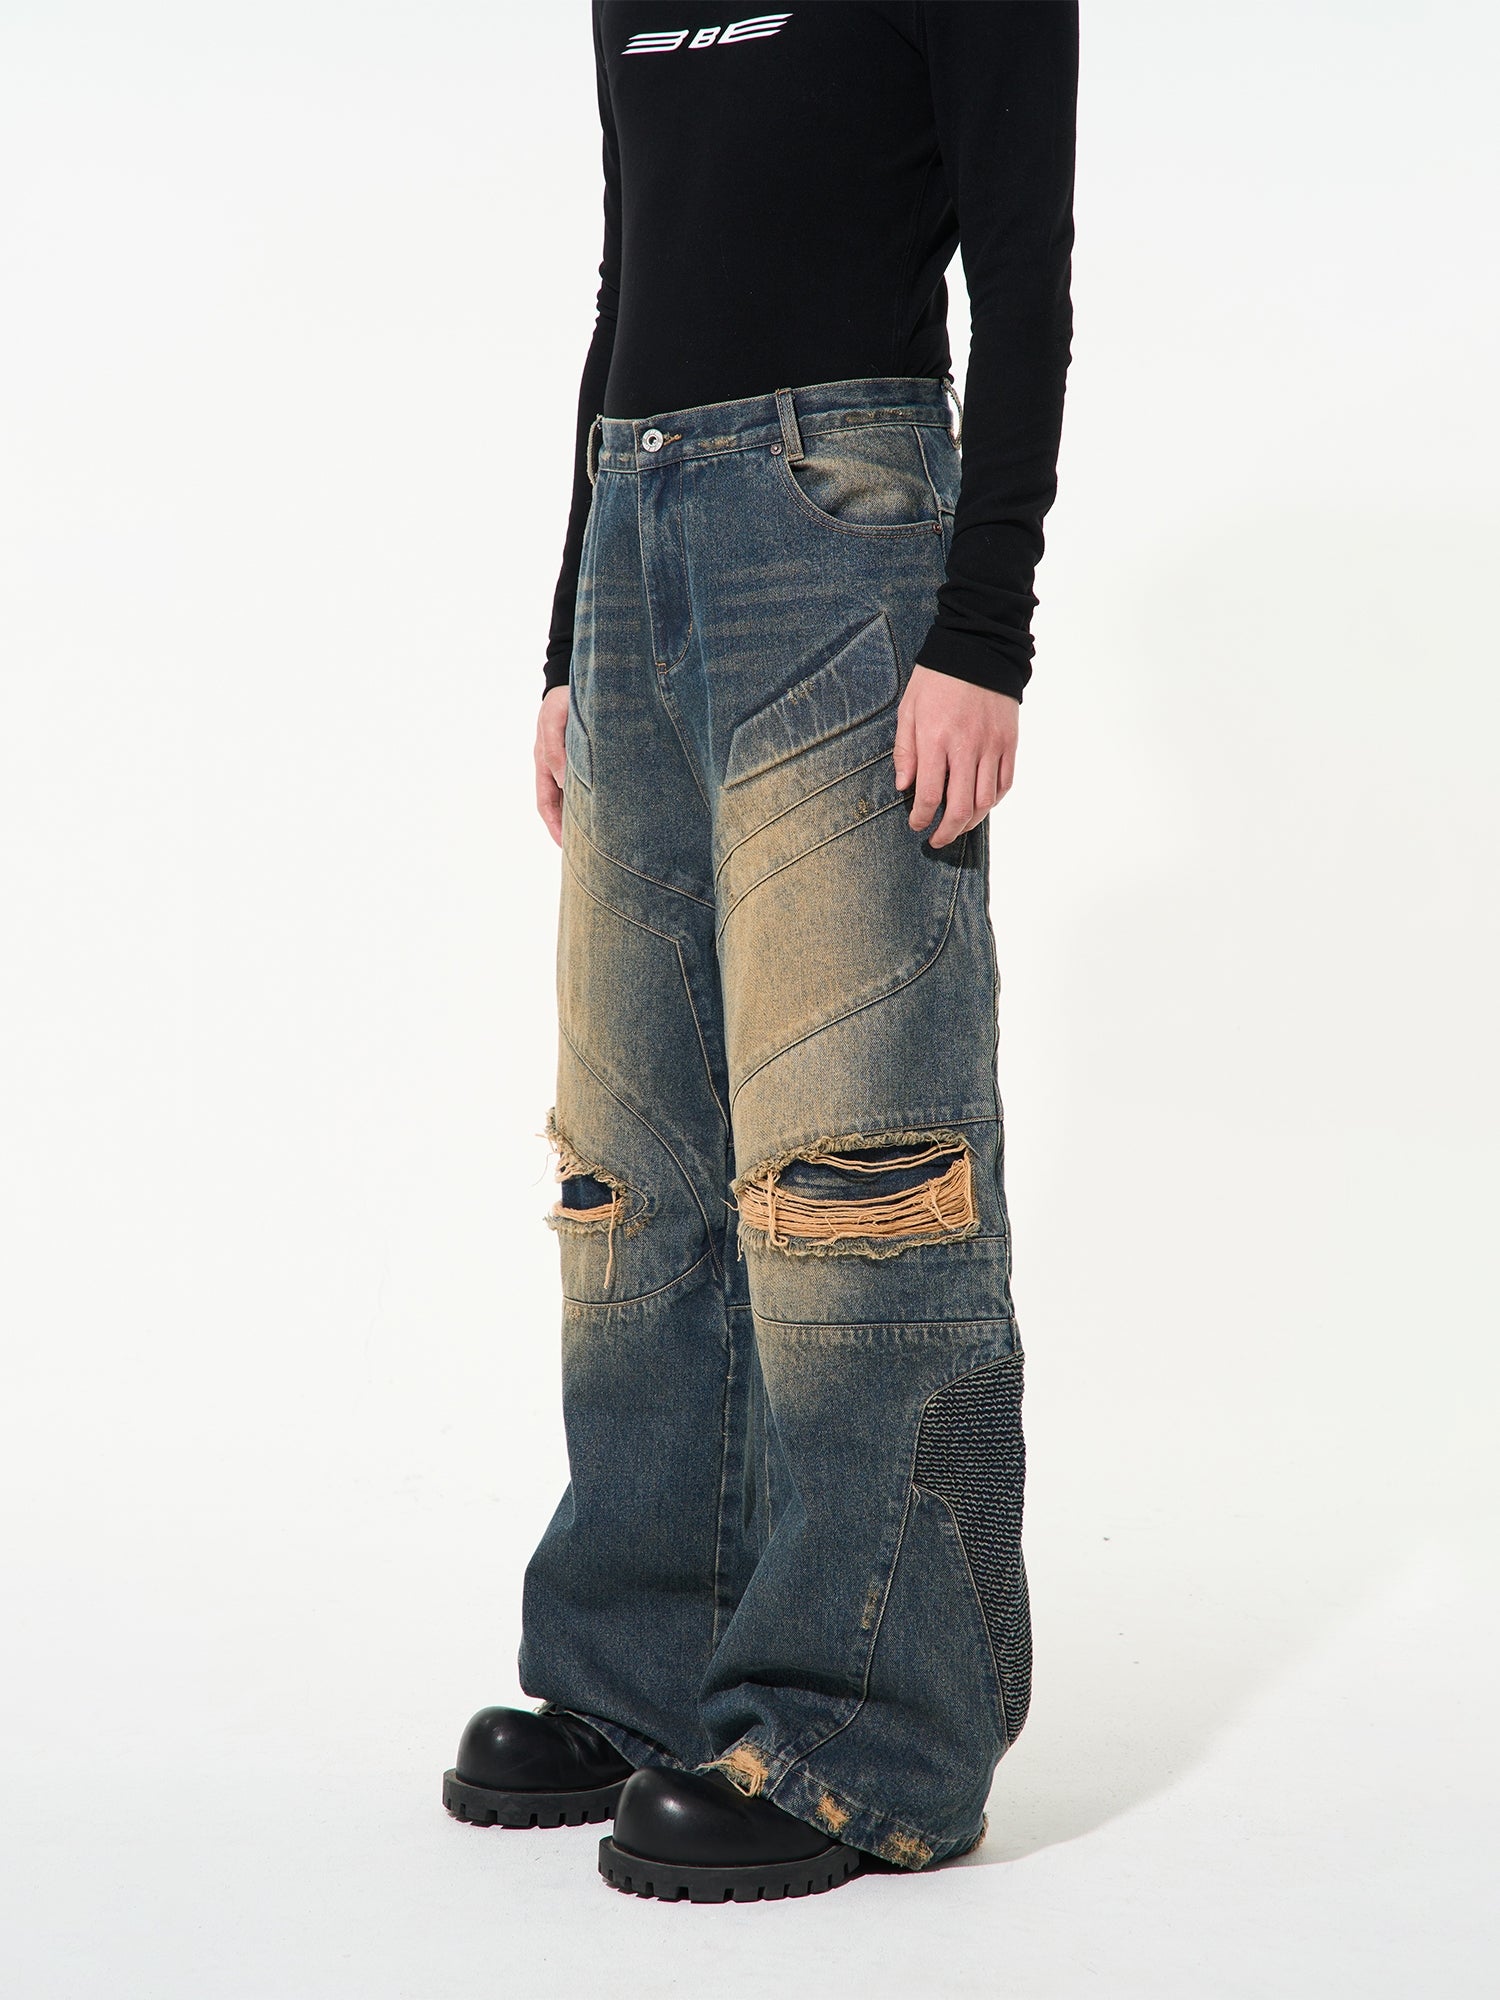 Carnage Jeans